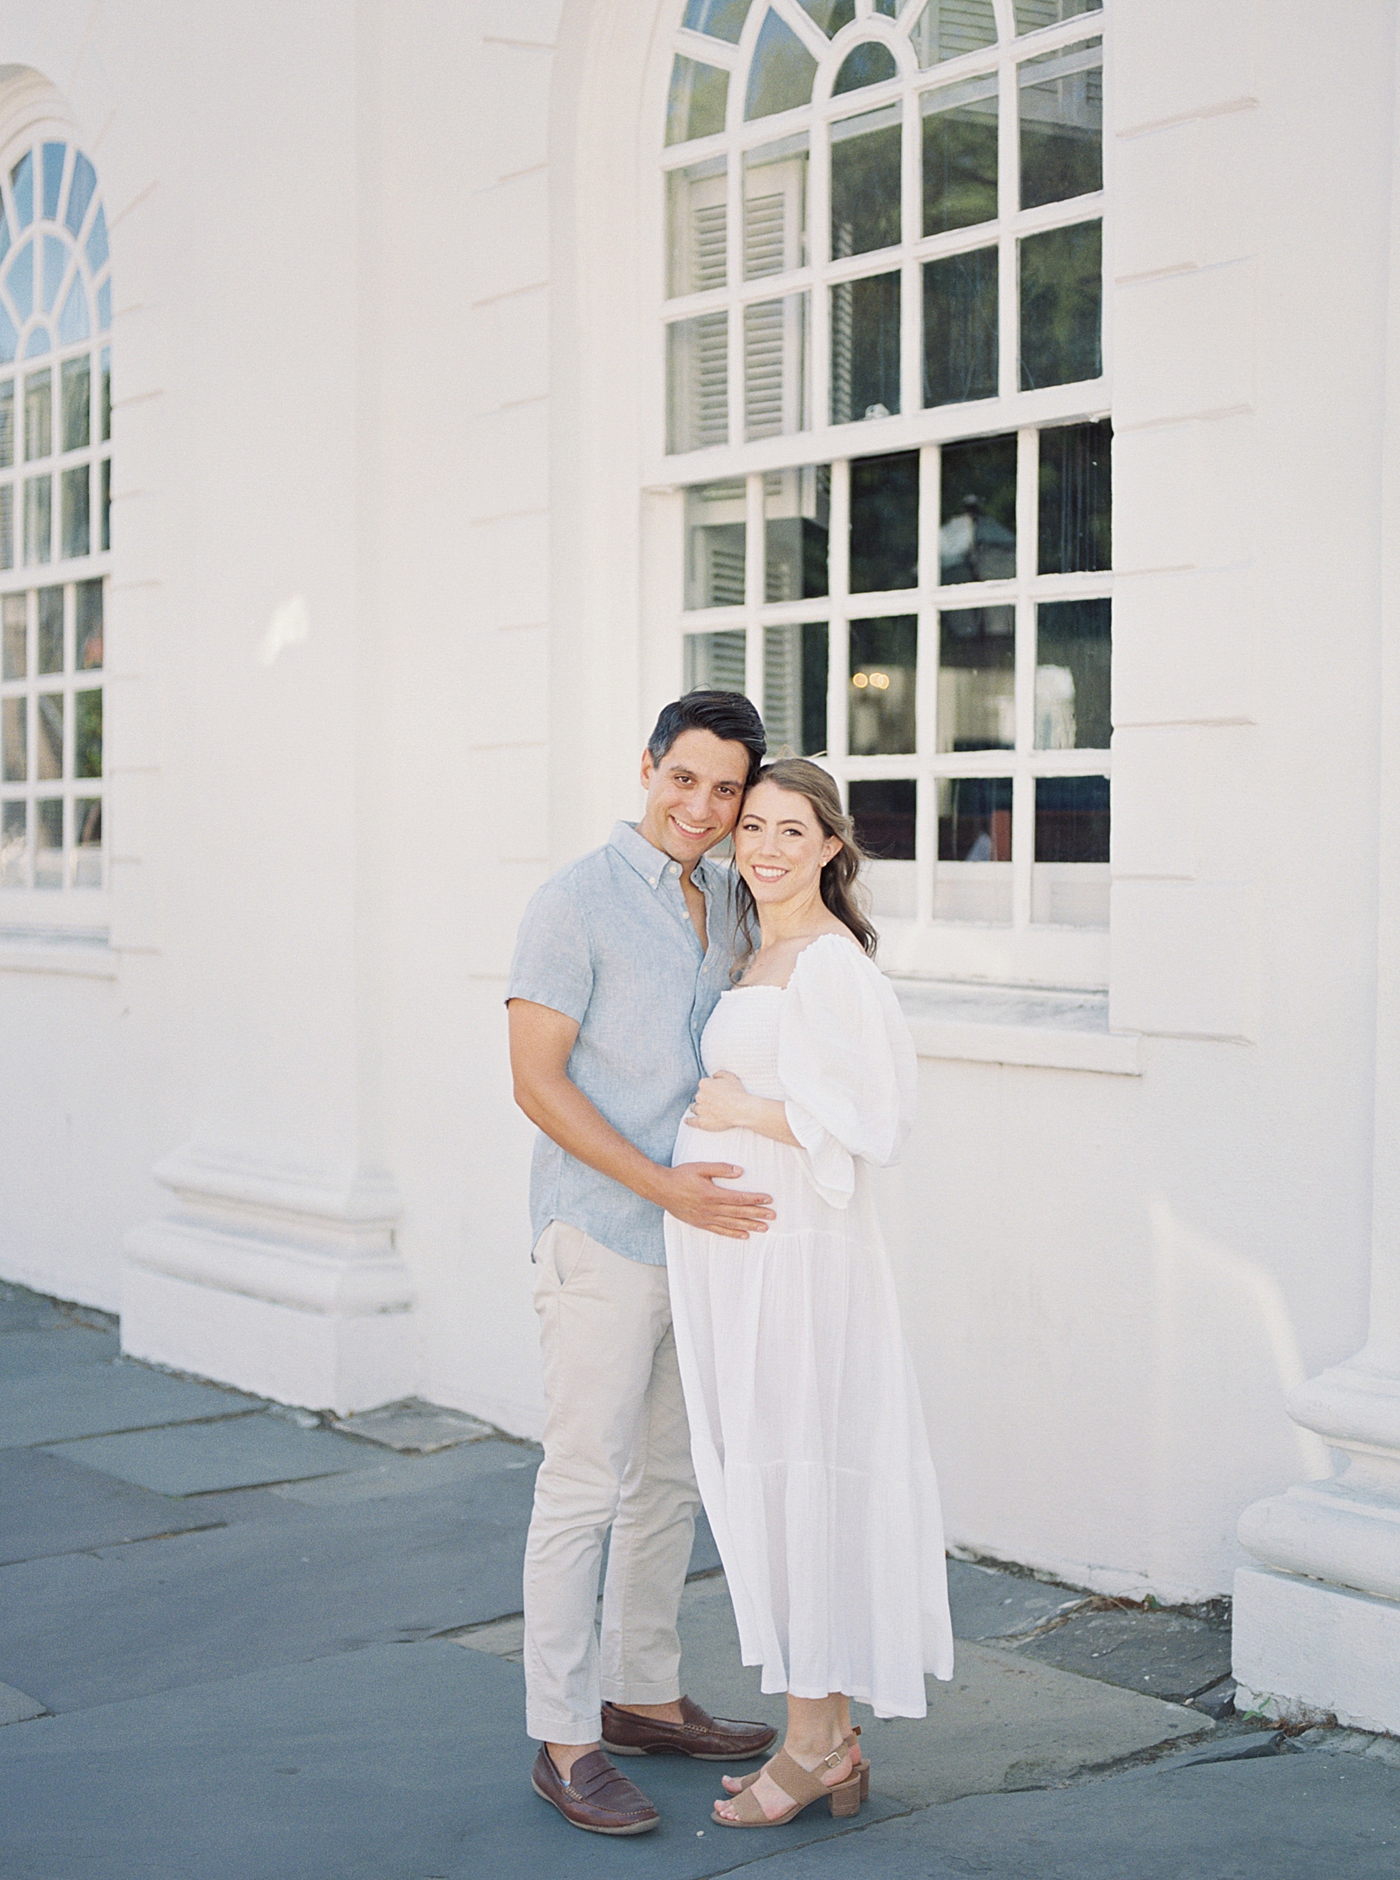 Mother and father to be snuggling together | Photo by Charleston Film Photographer Caitlyn Motycka